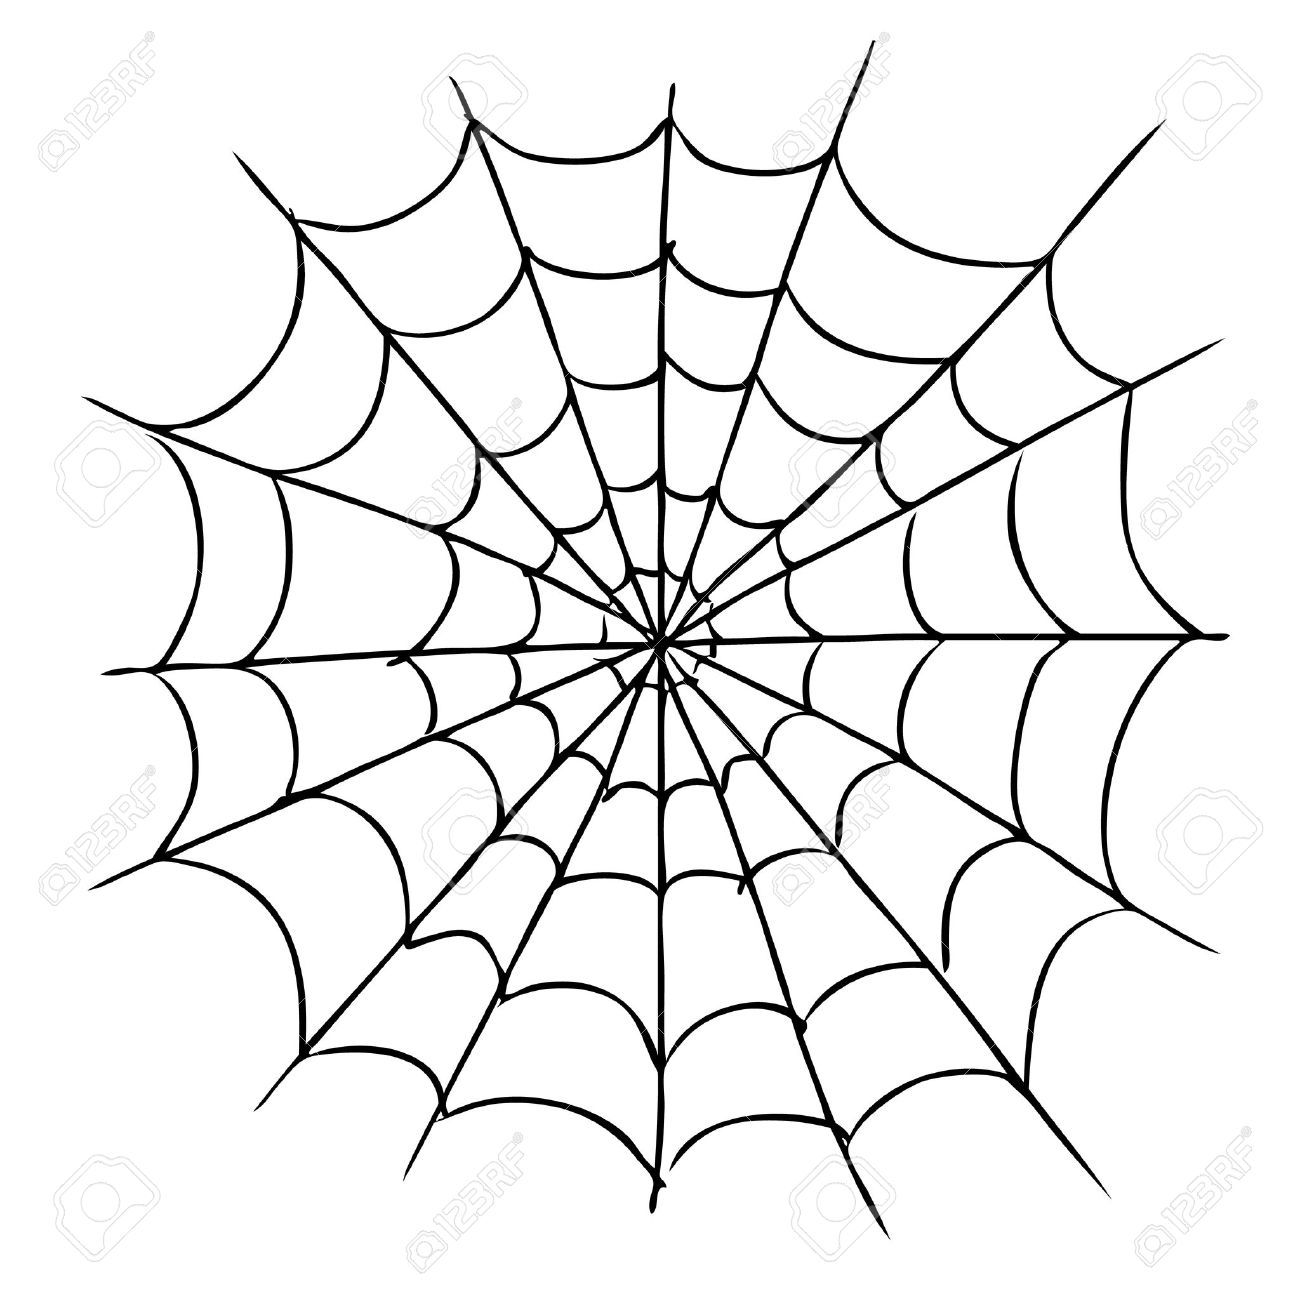 Spider Web Drawing Easy at PaintingValley.com | Explore collection of